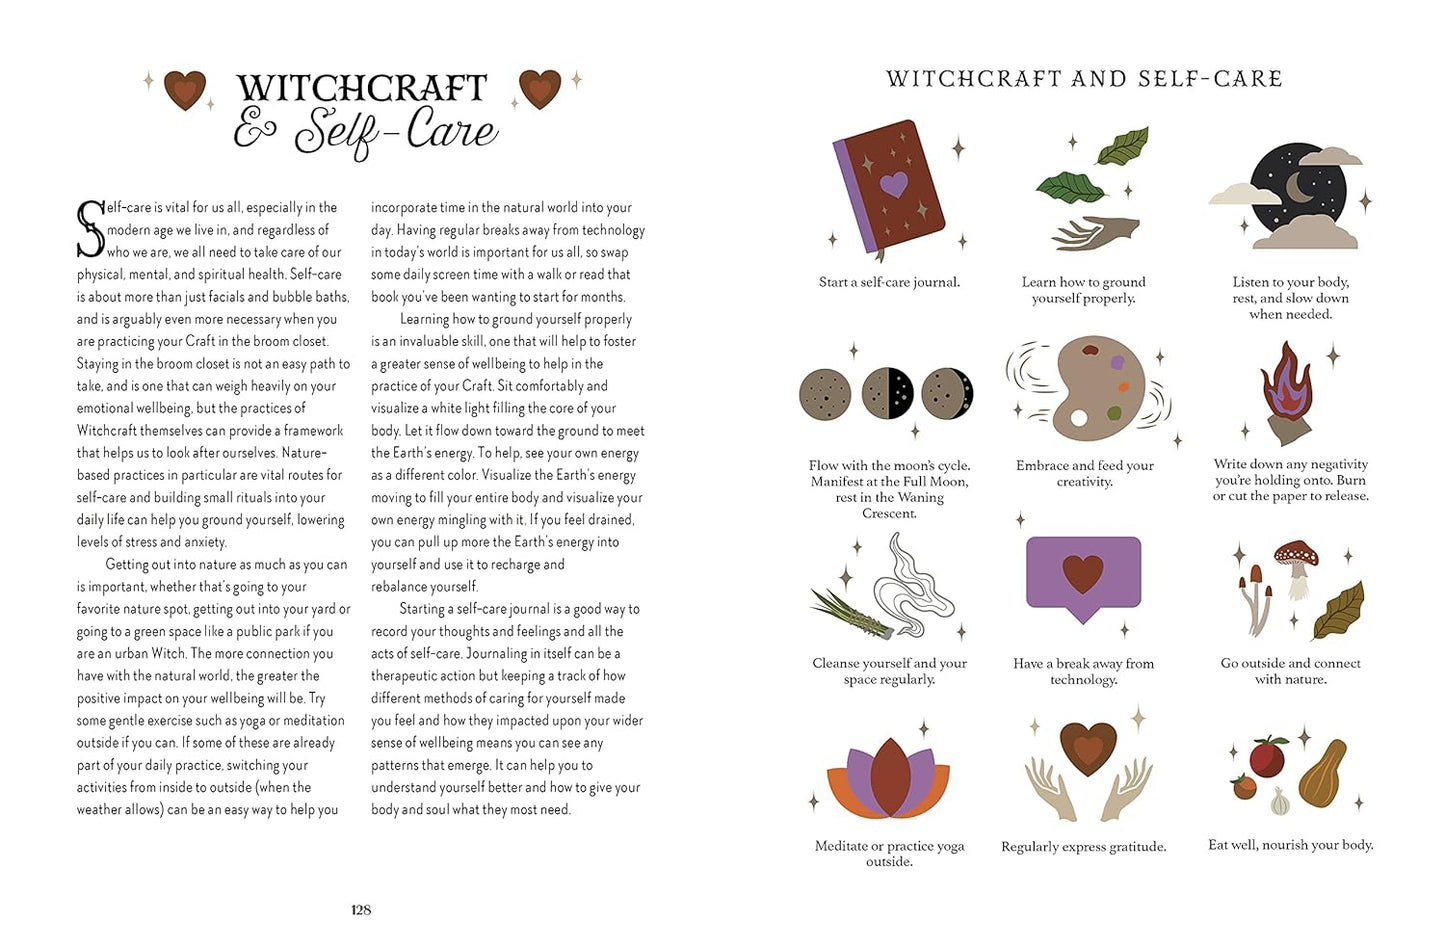 A two-page spread from the book describing witchcraft and self-case, with drawings of various symbols on the right page.